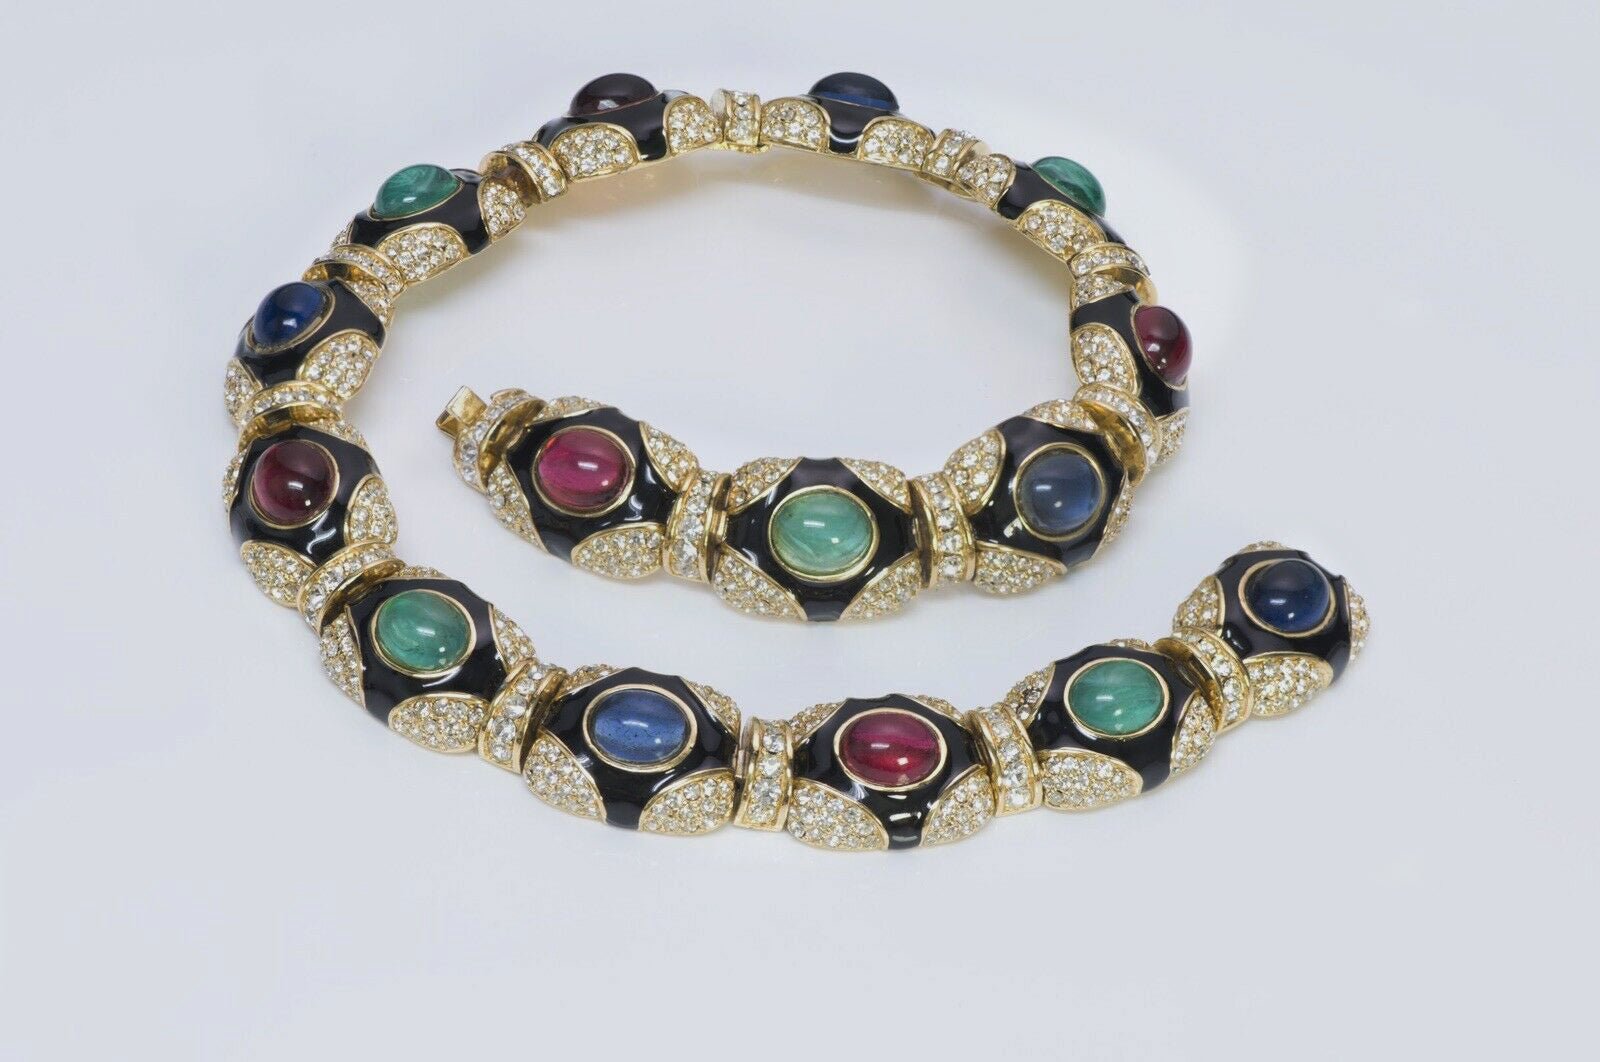 Ciner - A 129-Year-Old Costume Jewelry House With Glittering Craftsmanship - DSF Antique Jewelry